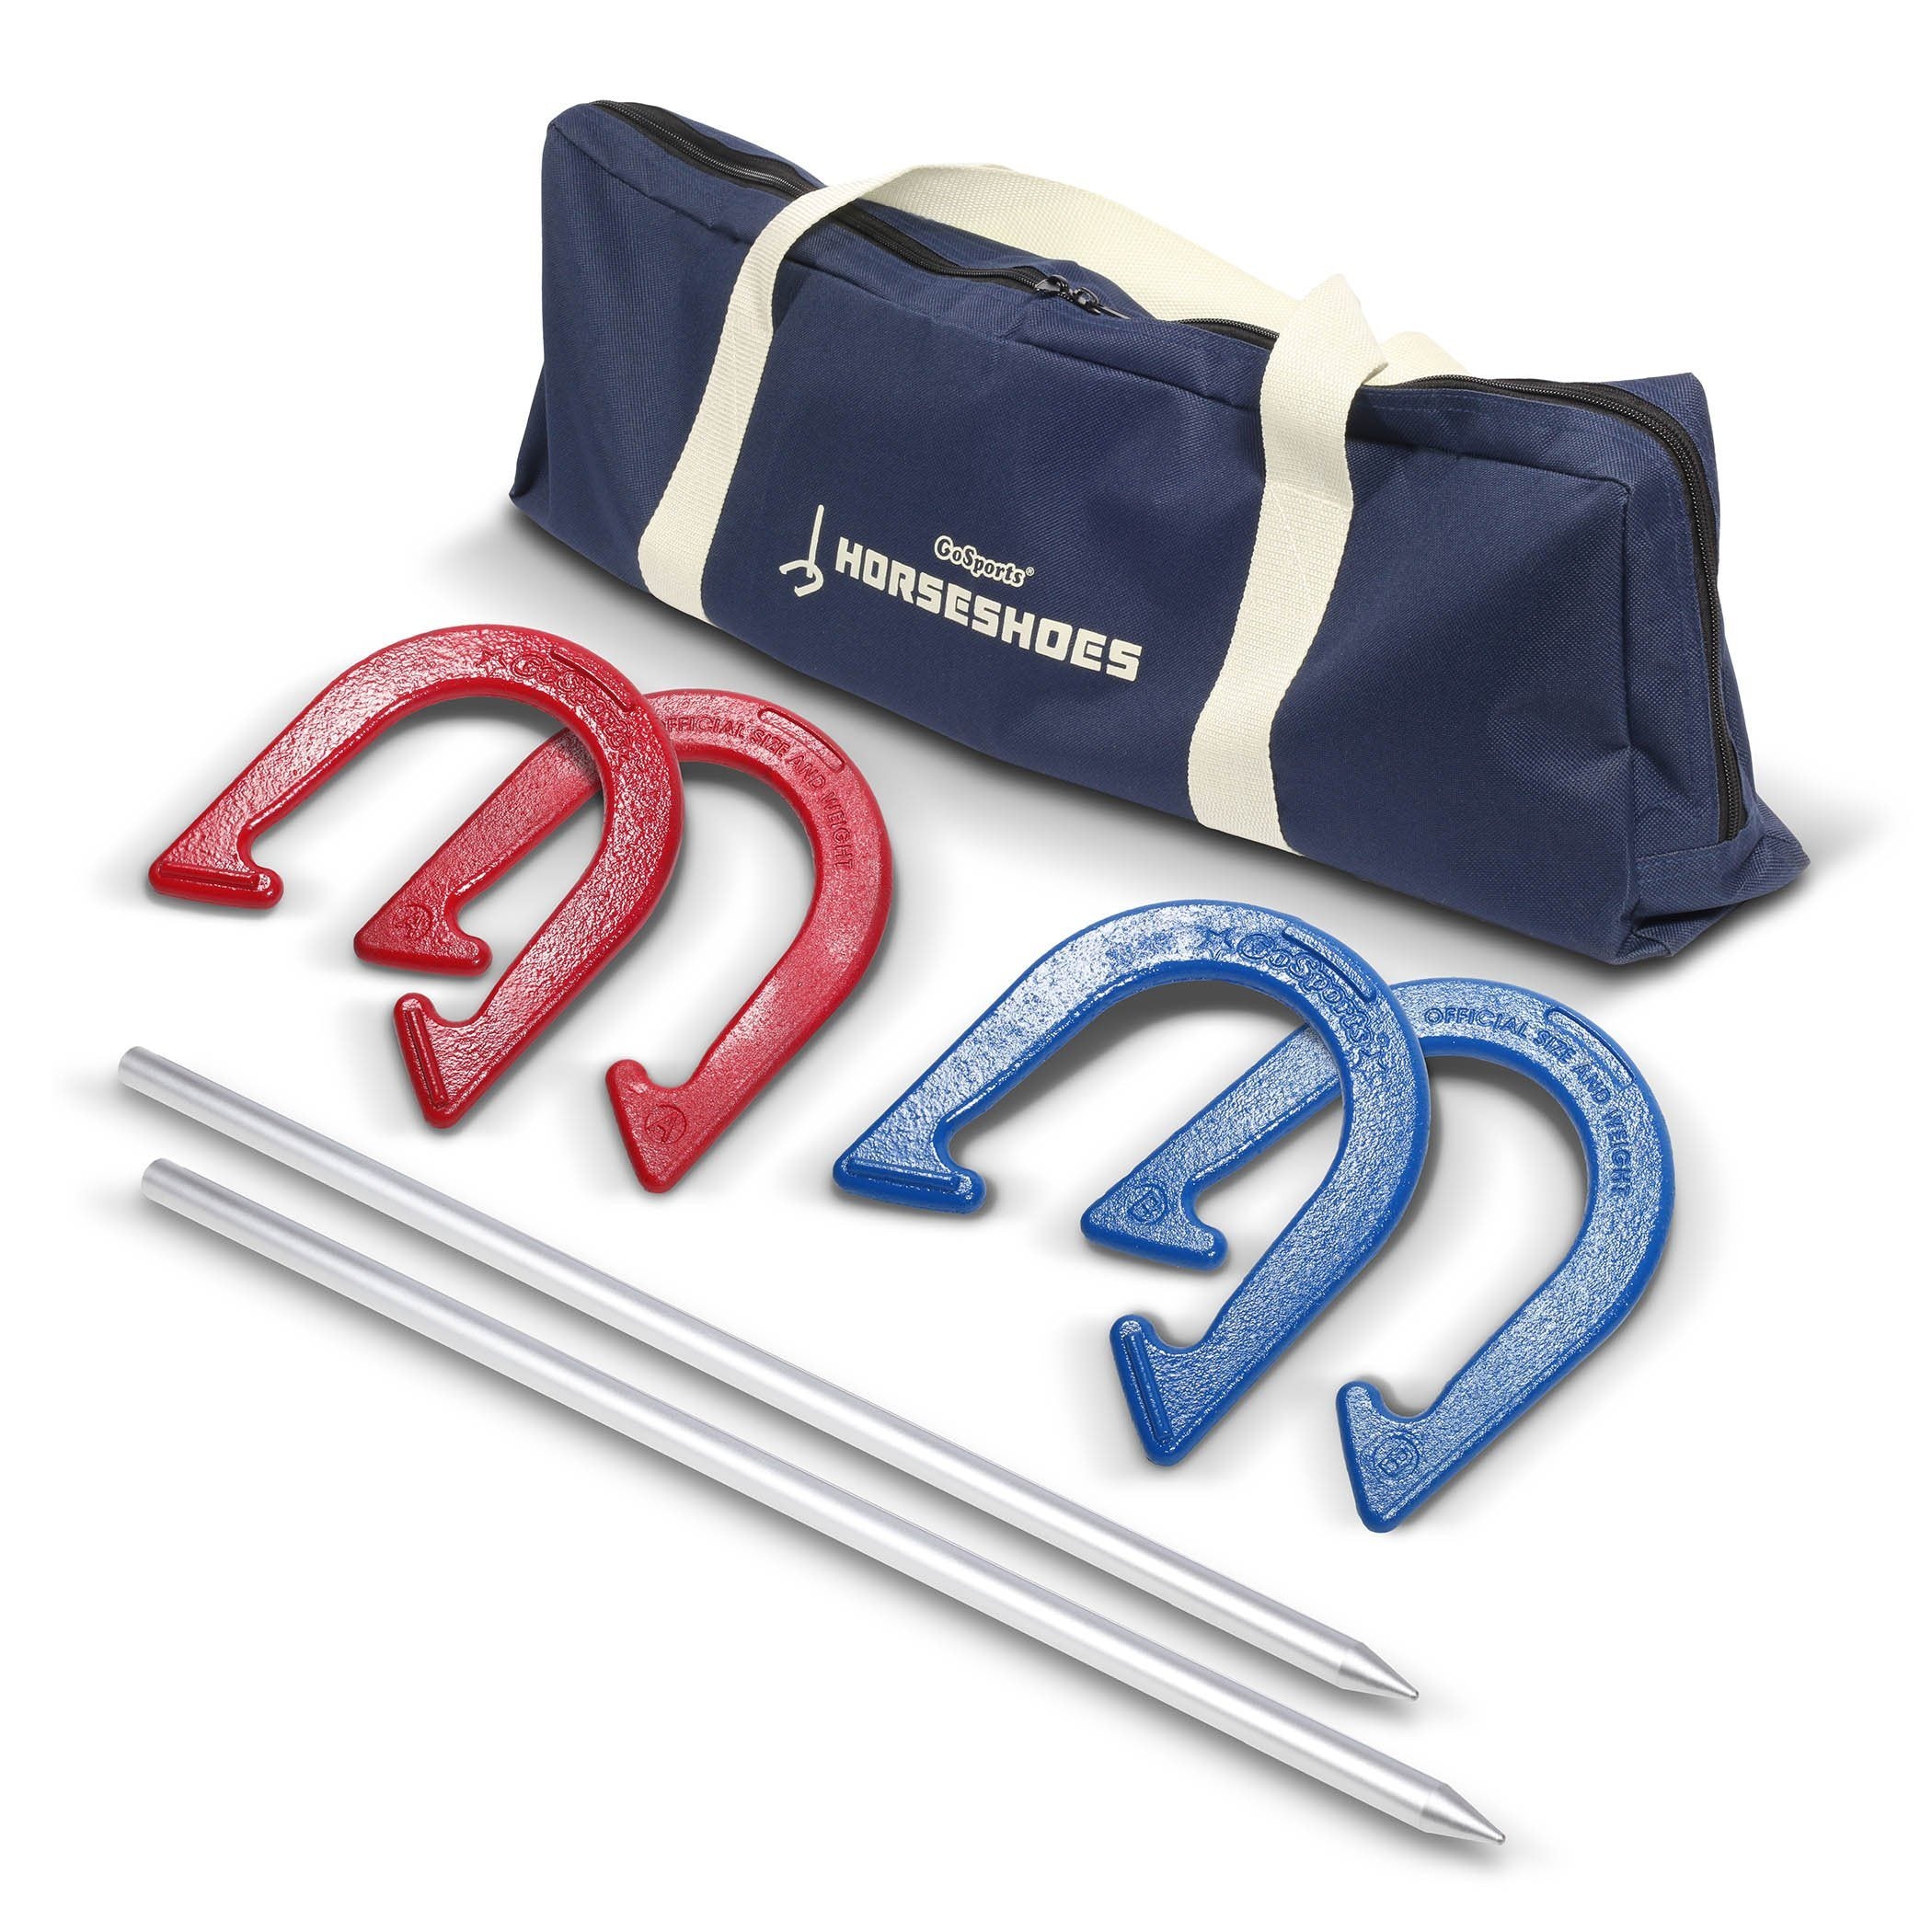 YDDS Horseshoes Outside Game Set-Portable Outdoor Horseshoe Set Includes 4  Professional Solid Steel Horseshoes with Solid Steel Stakes & Carrying Bag,  Perfect for Backyard and Beach : Sports & Outdoors 